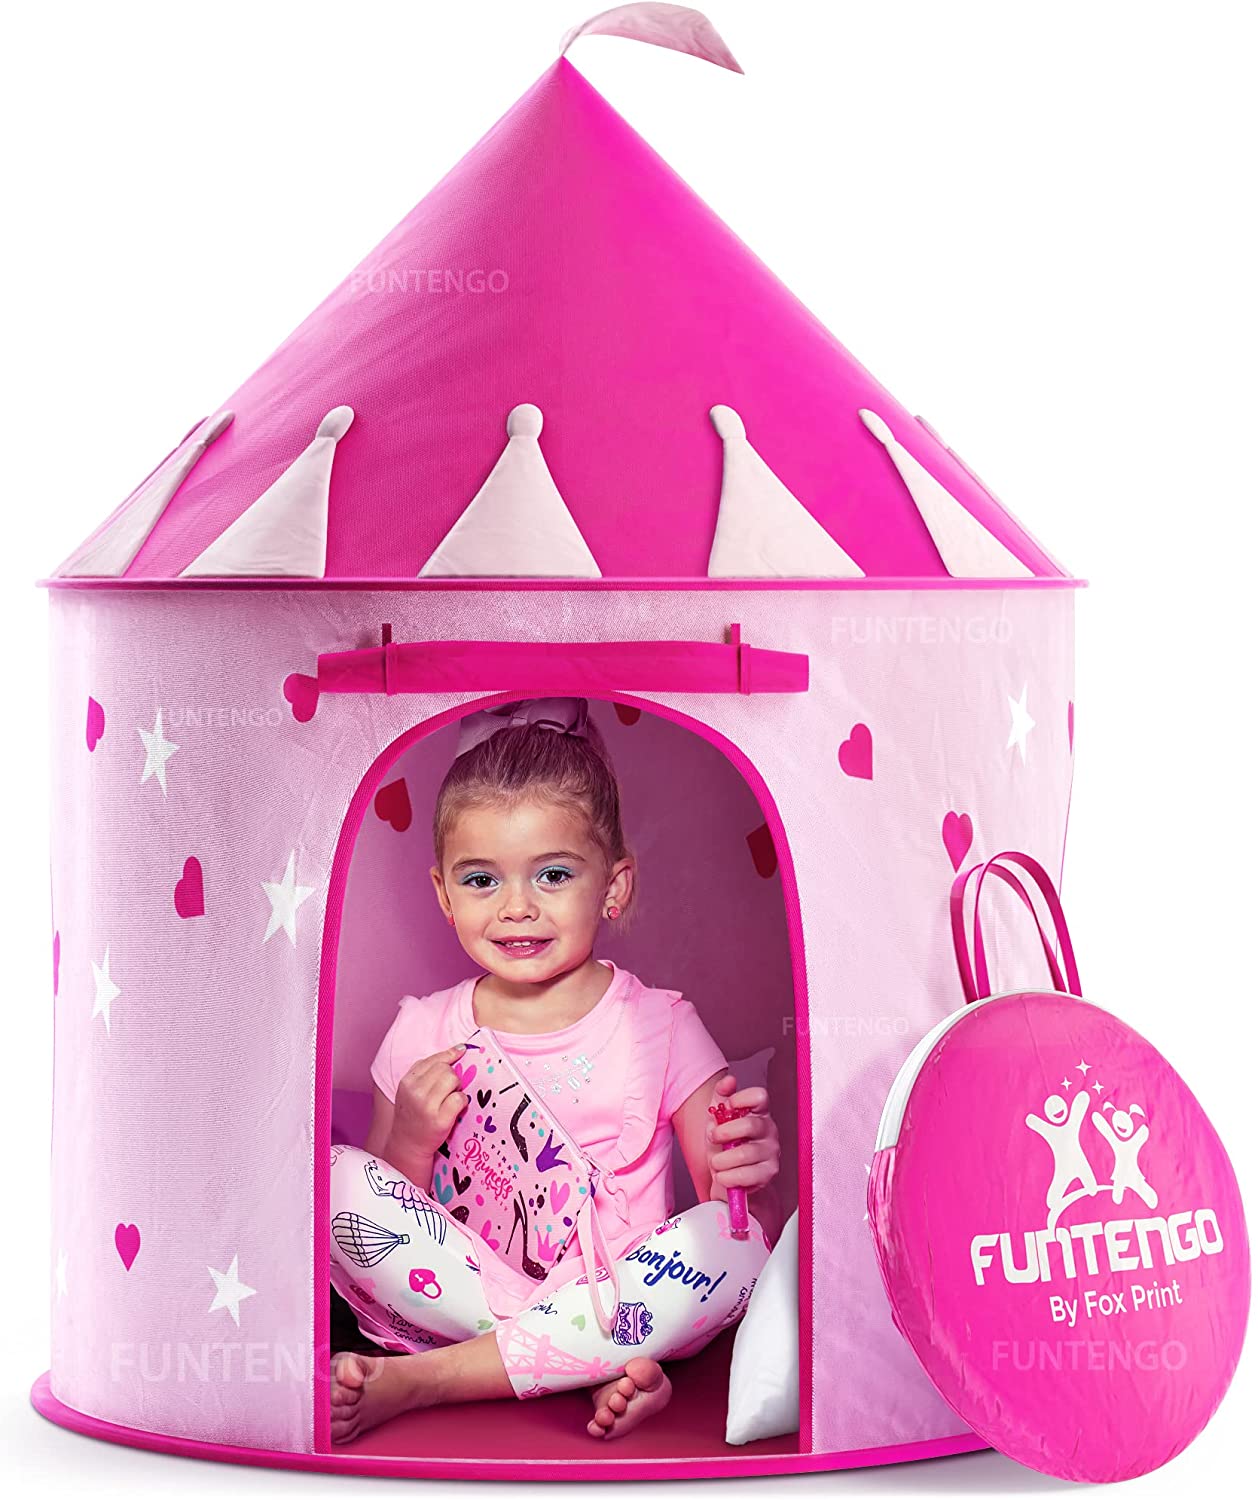 Foxprint Collapsible Princess Castle Toddler Girl Toy